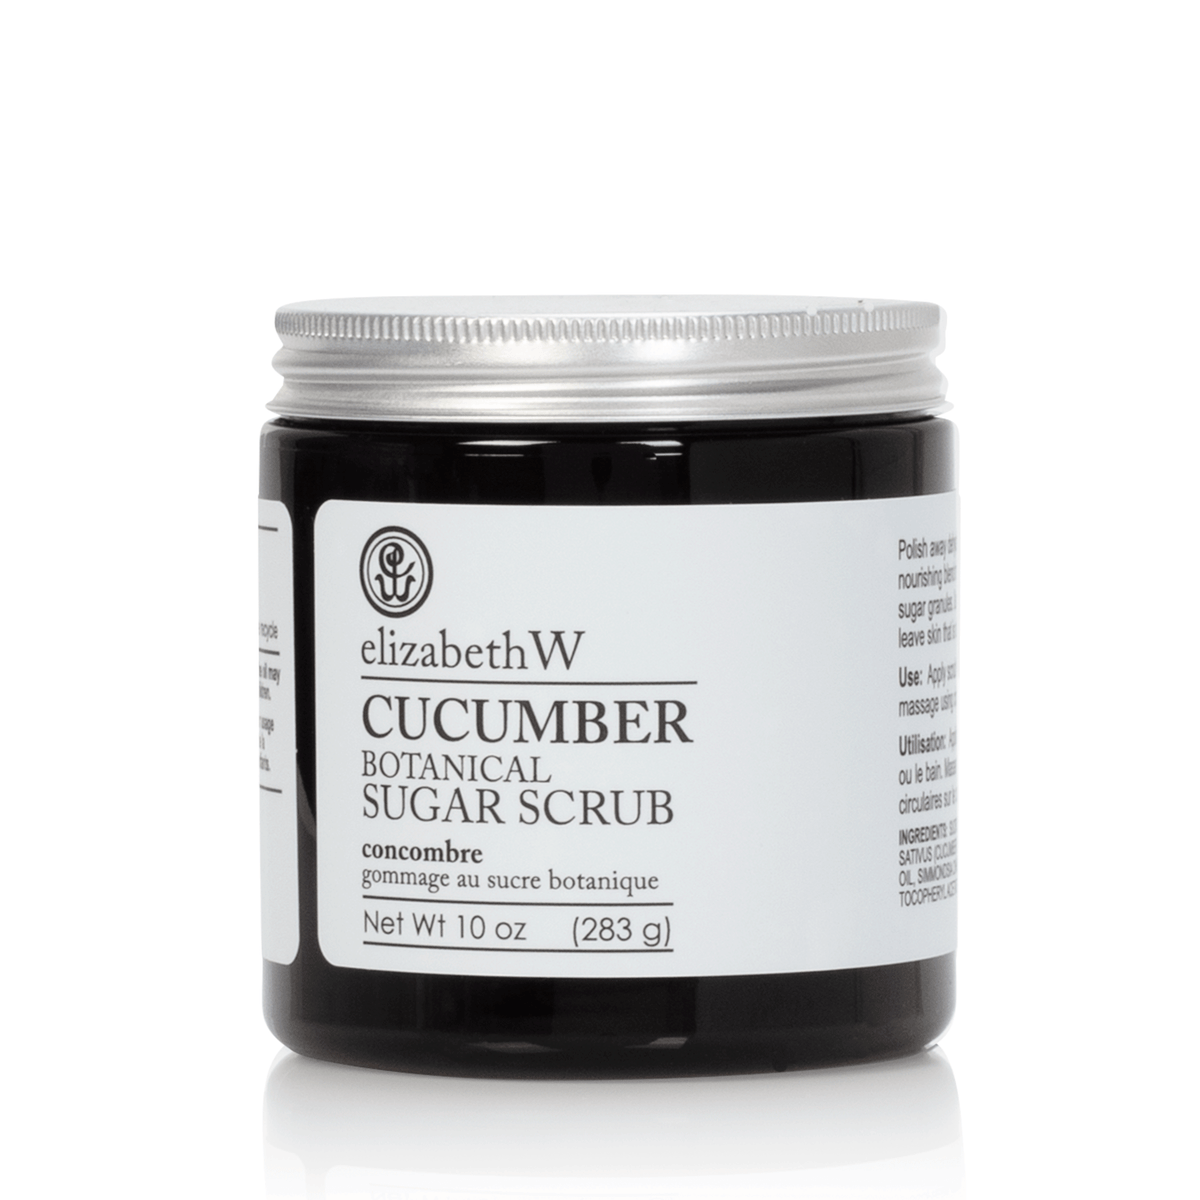 A jar of elizabeth W Purely Essential Cucumber Sugar Scrub on a reflective surface with clear and visible label details.